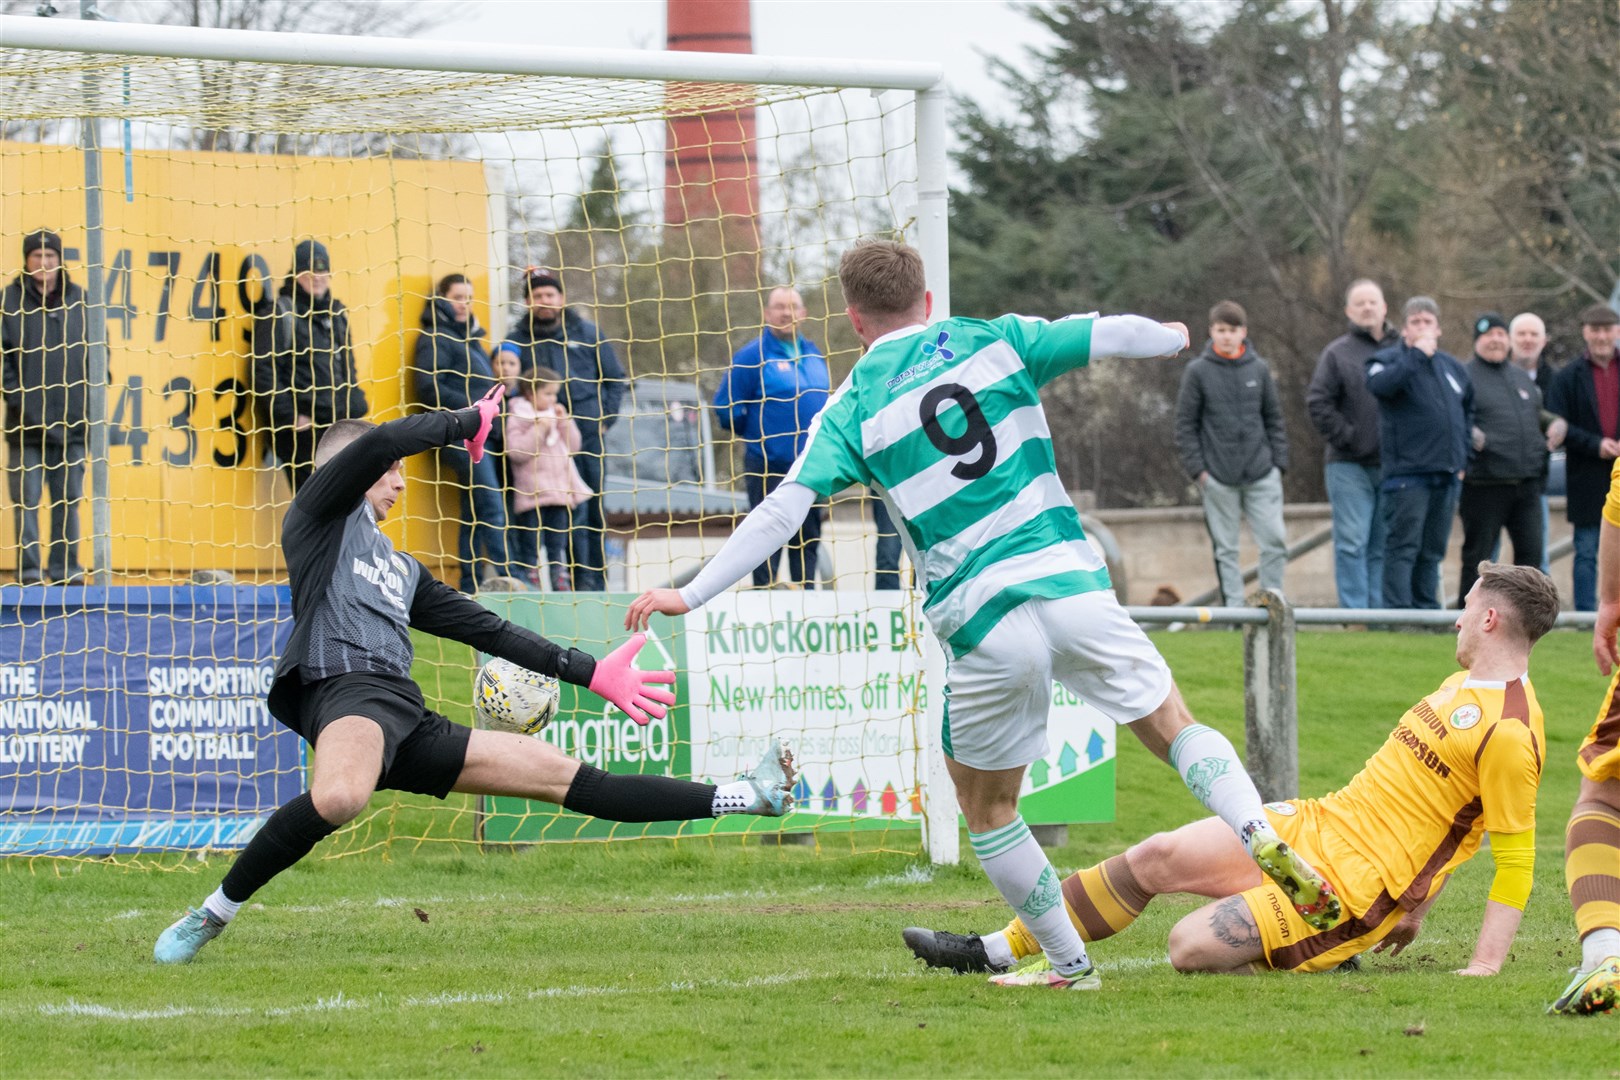 Buckie Thistle's #9 Josh Peters opens the scoring for the travelling Jags...Forres Mechanics FC (2) vs Buckie Thistle FC (3) - Highland Football League 22/23 - Mosset Park, Forres 01/04/23...Picture: Daniel Forsyth..